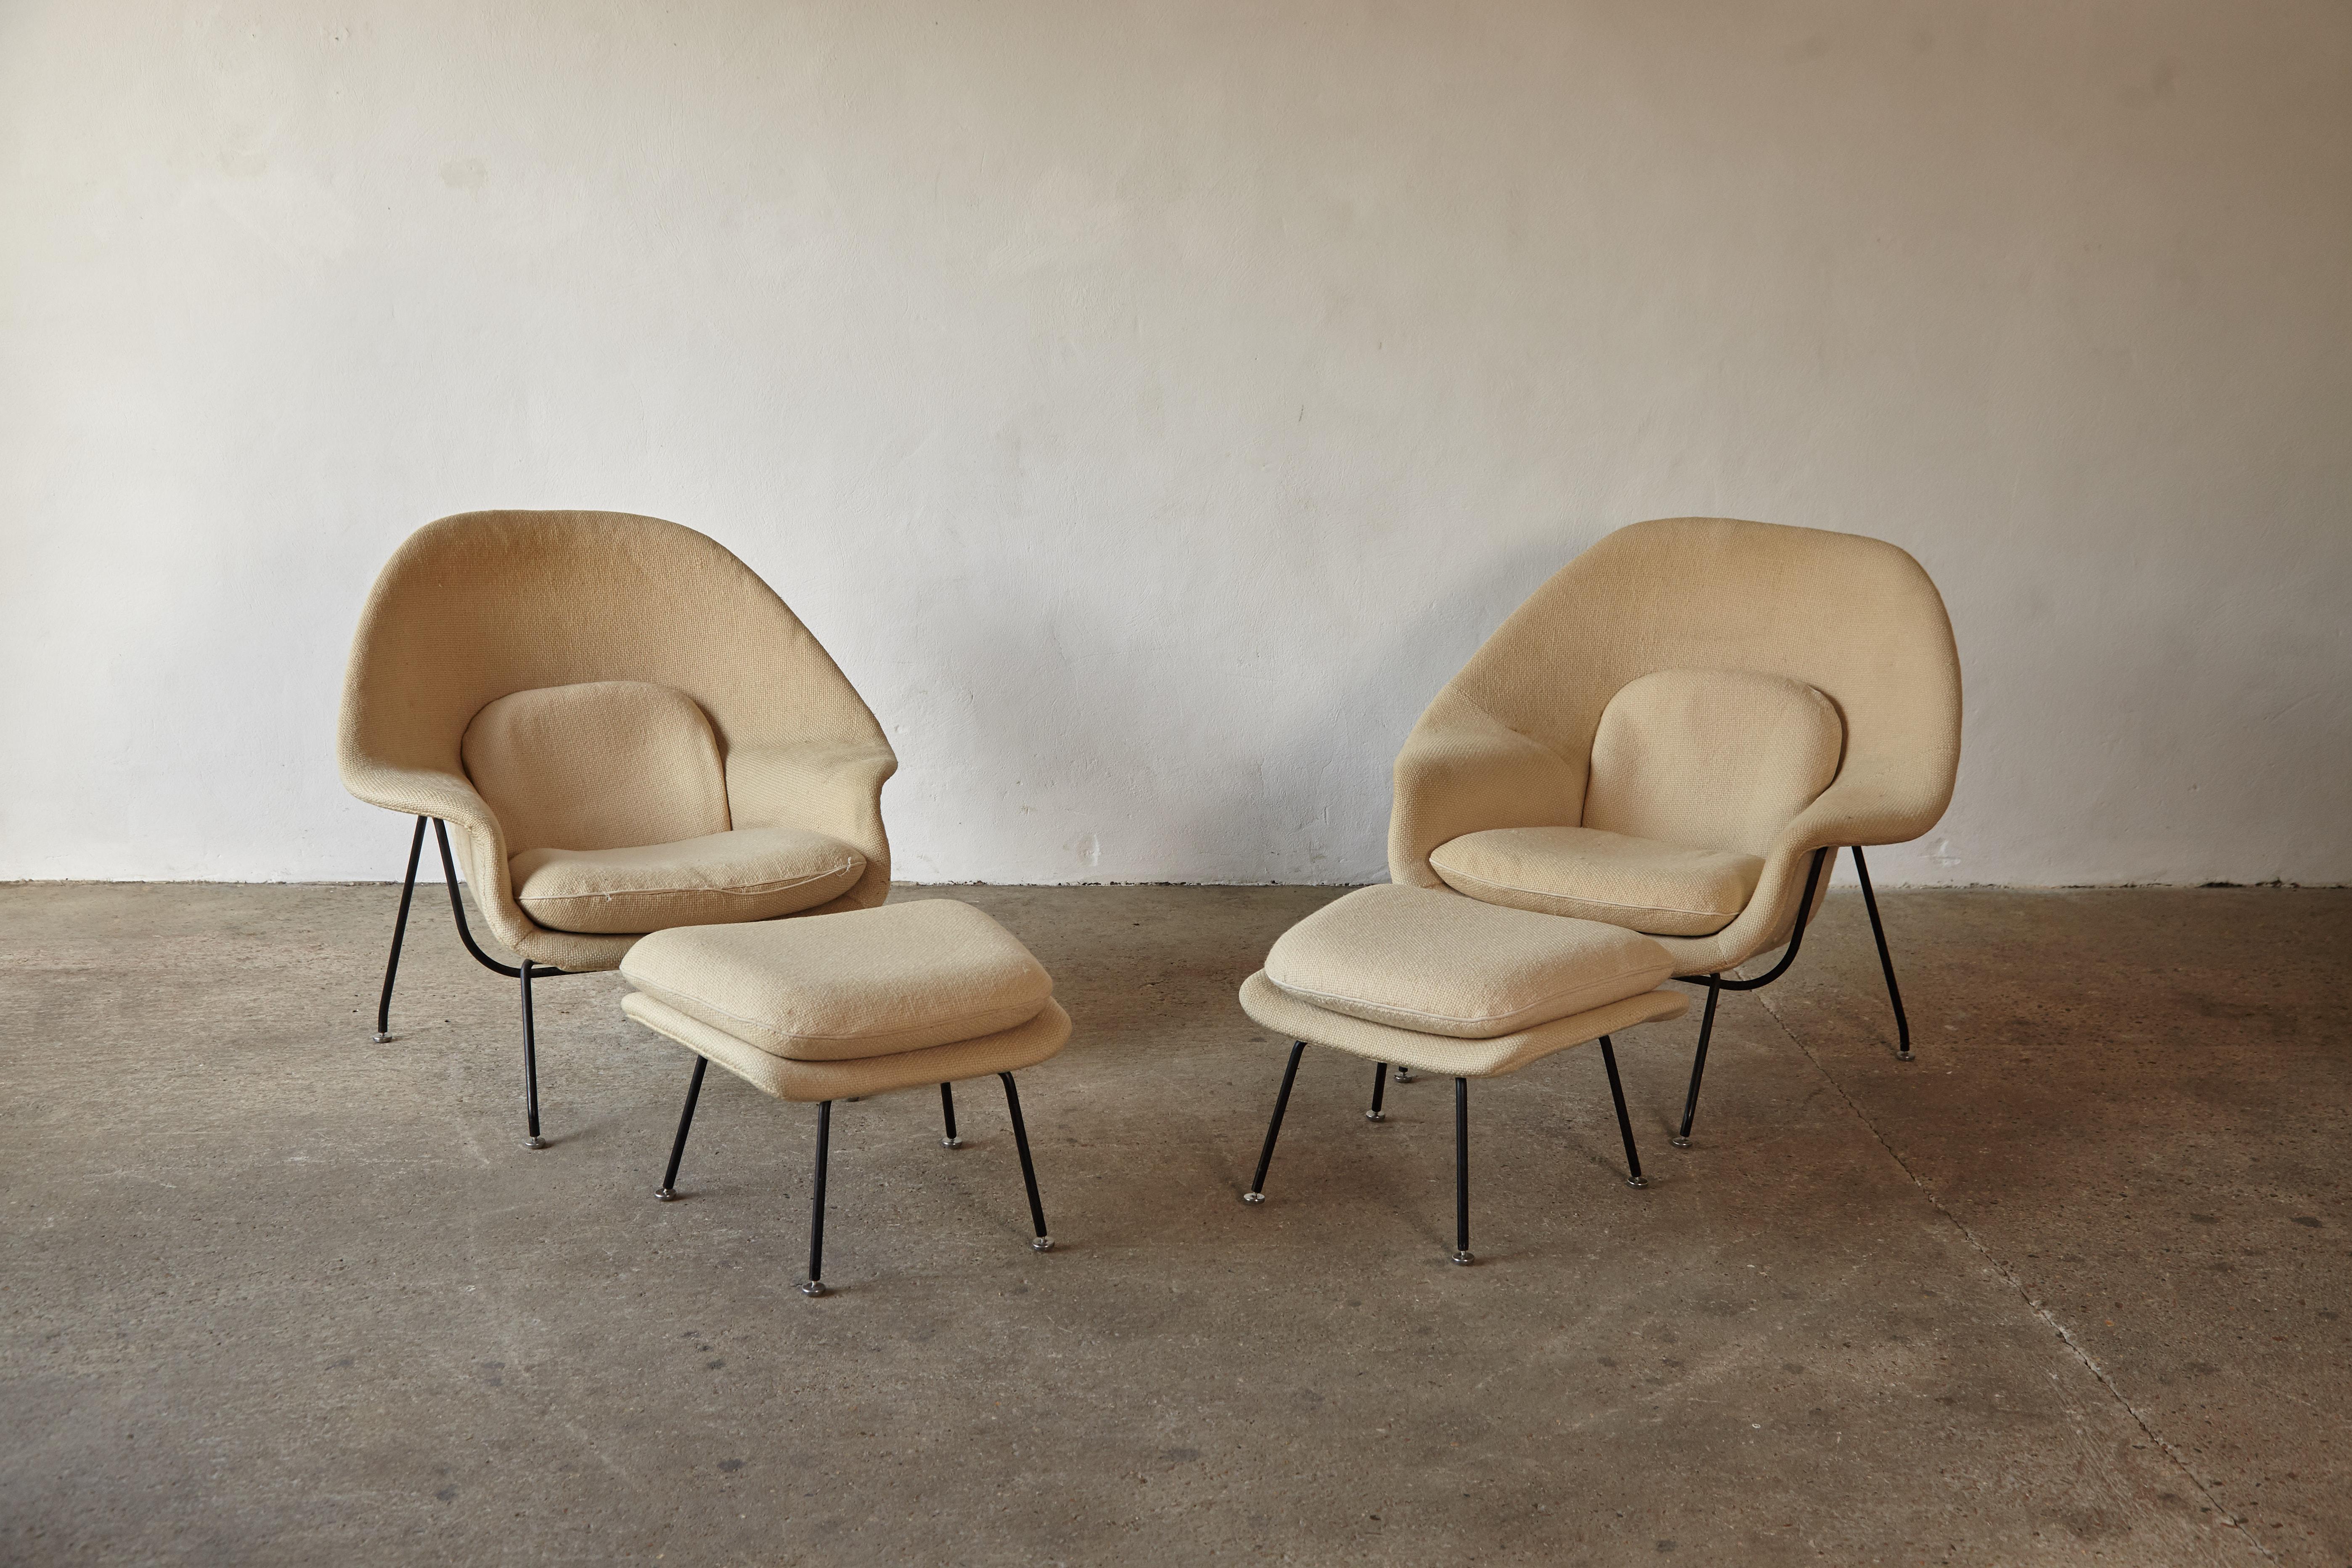 Steel Rare Early Pair of Eero Saarinen Womb Chairs and Ottomans, Knoll, USA, 1950s For Sale